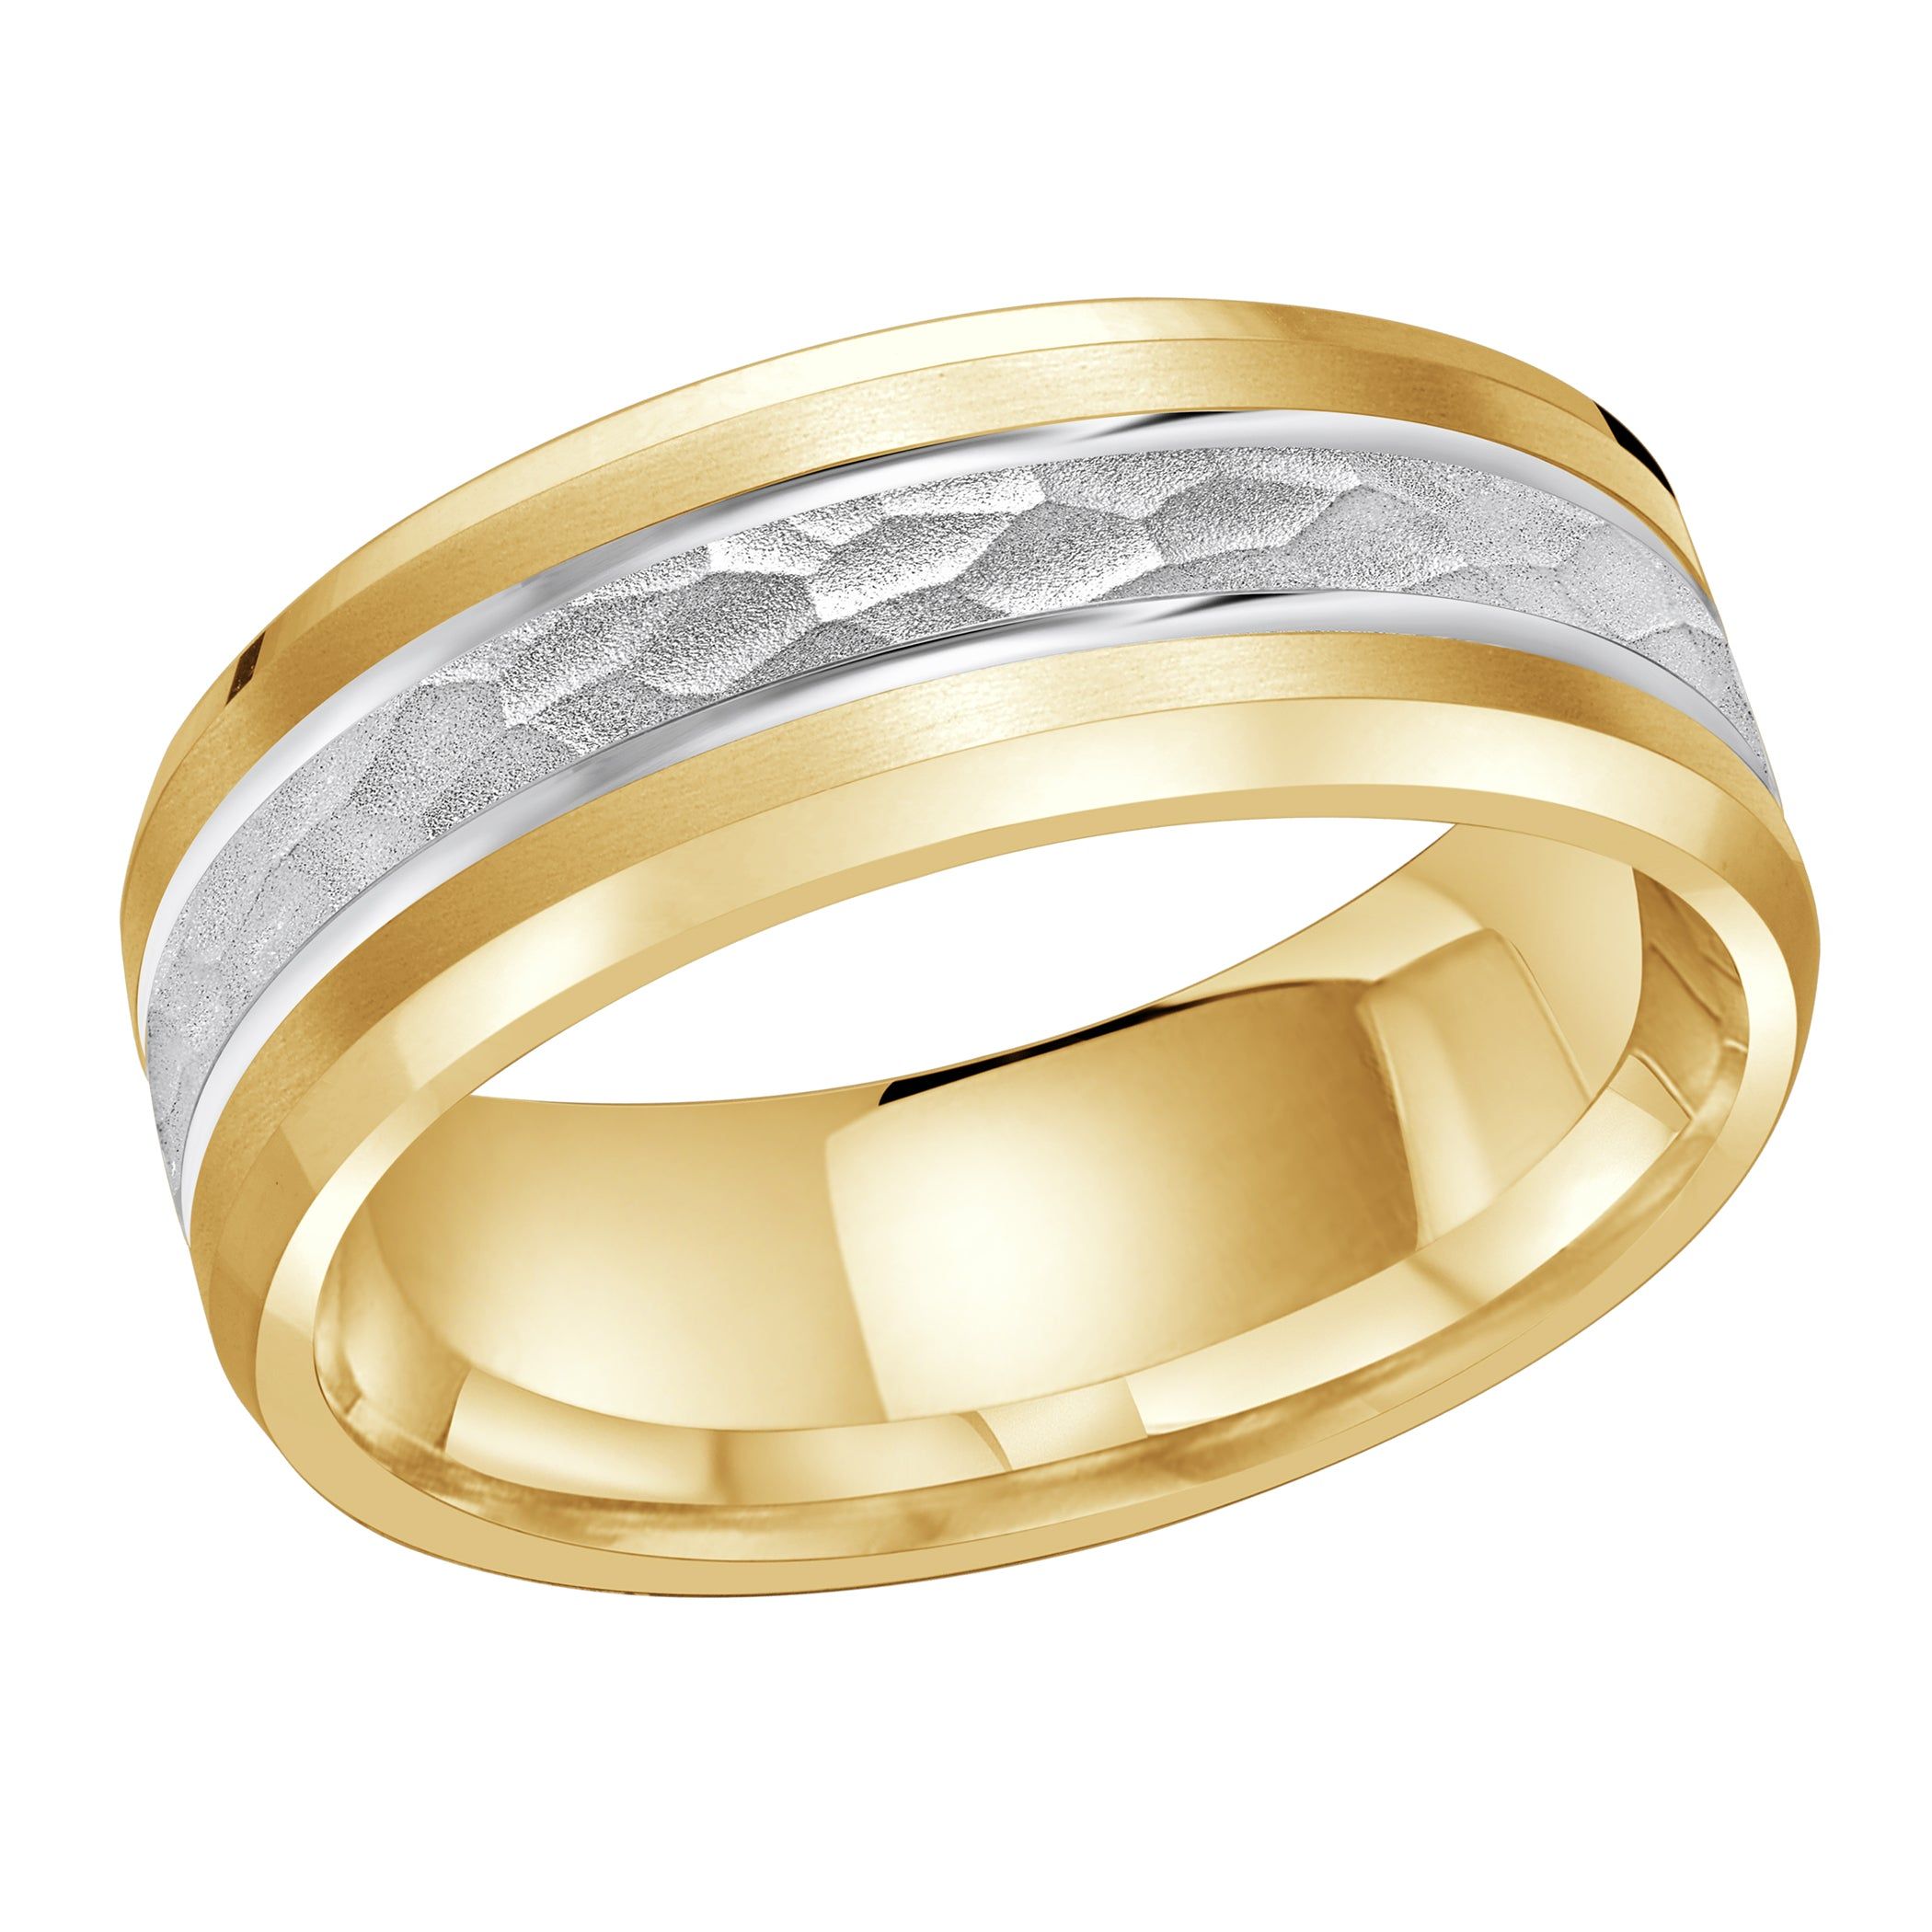 Men's 8mm Two-tone Double Inlay Hammered-finish Wedding Ring